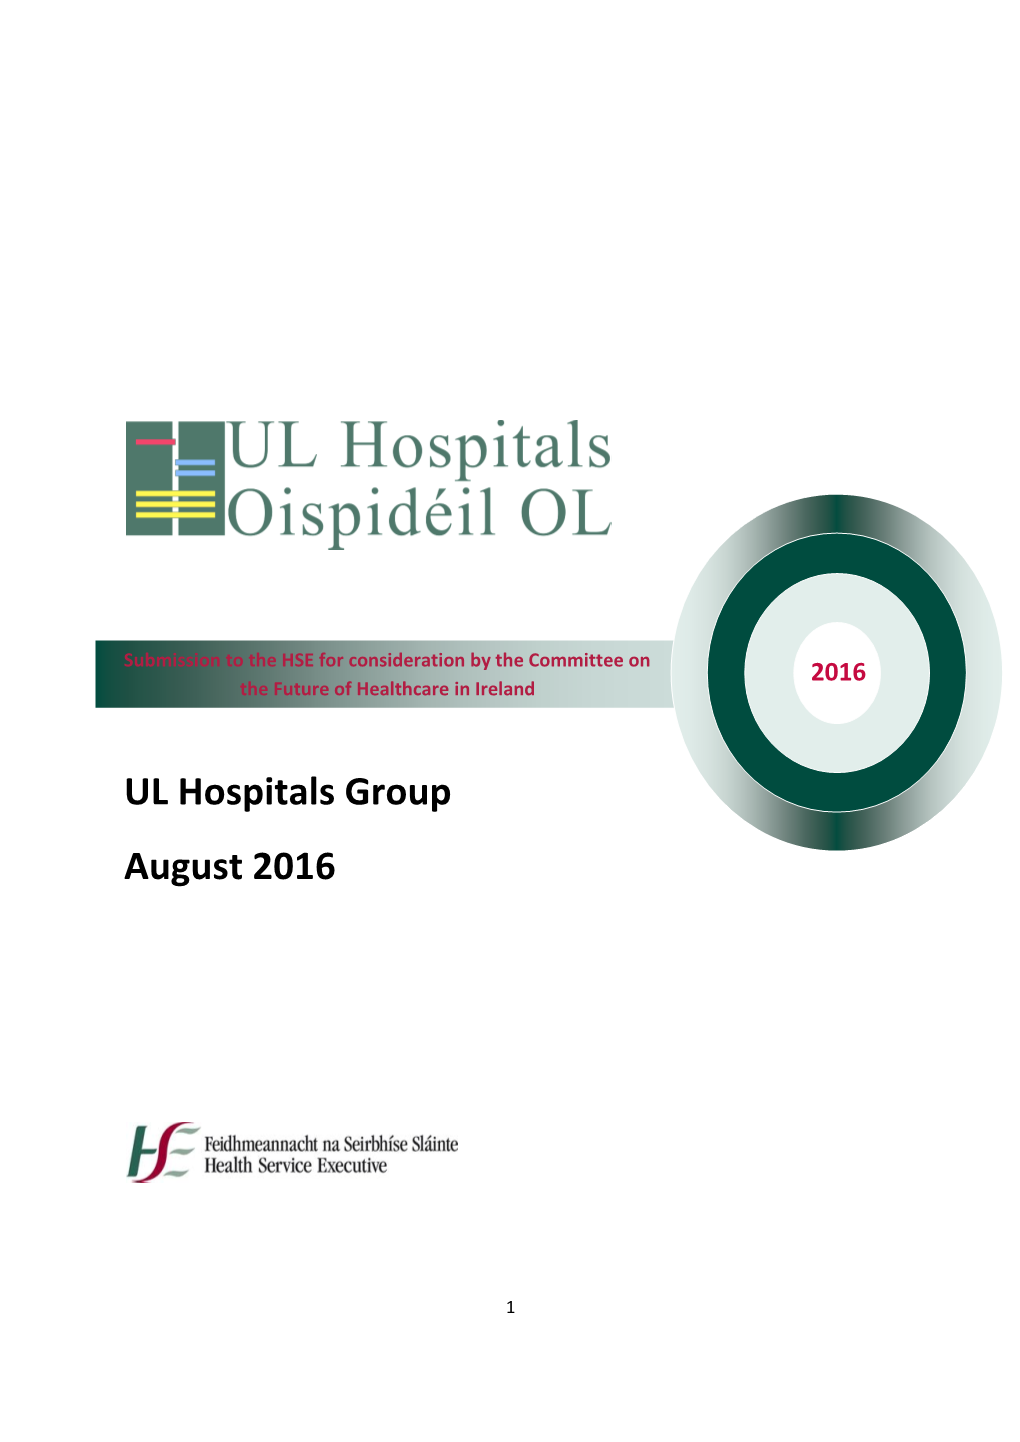 UL Hospitals Group August 2016